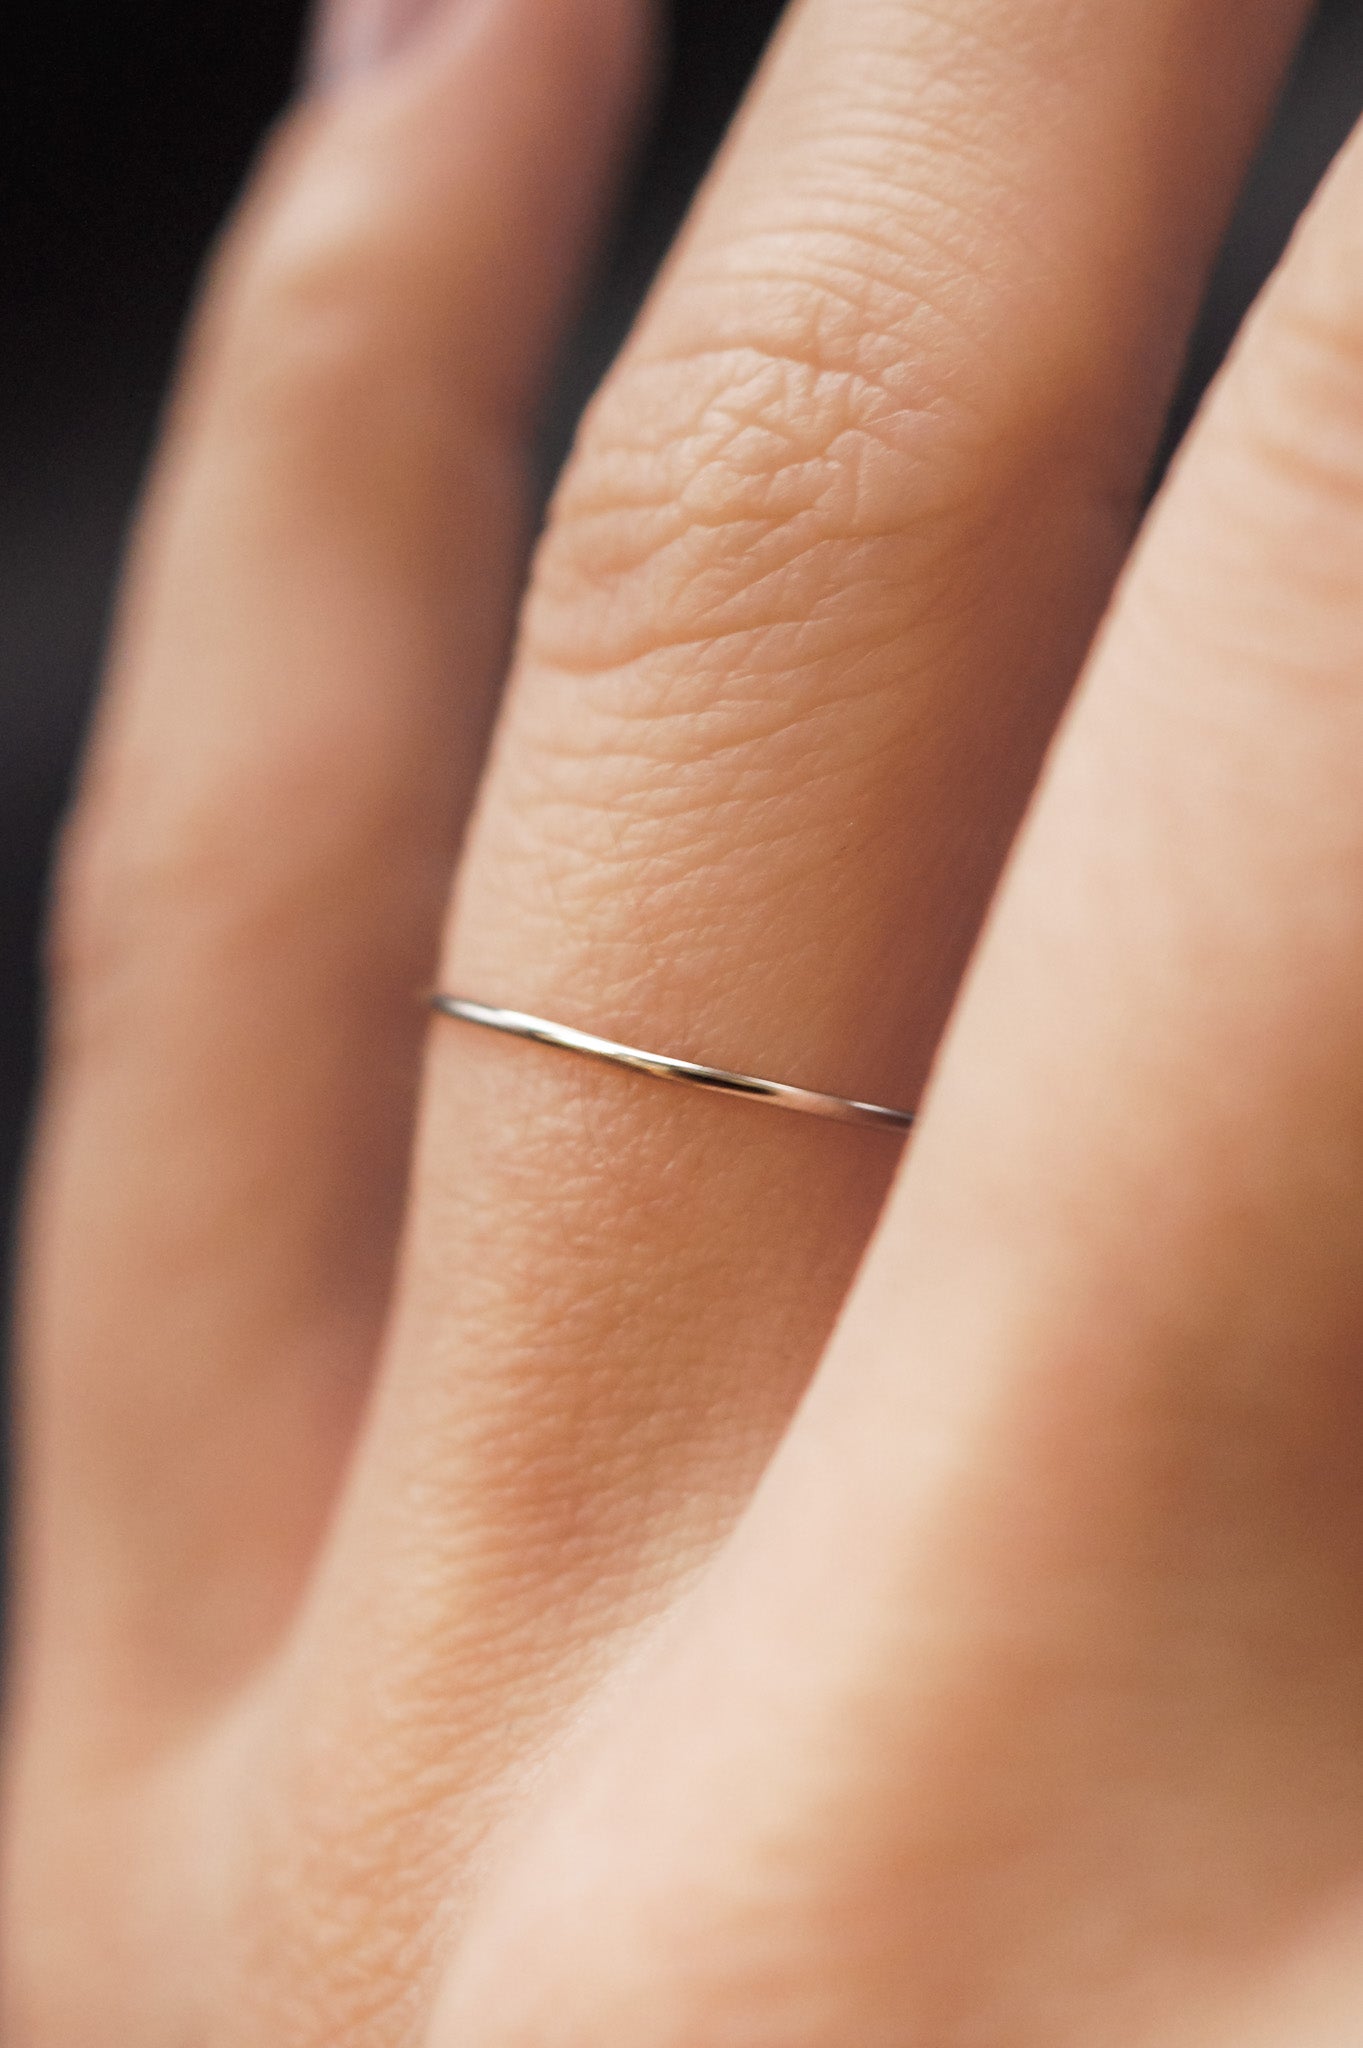 Ultra Thin Ring, Solid 14K White Gold